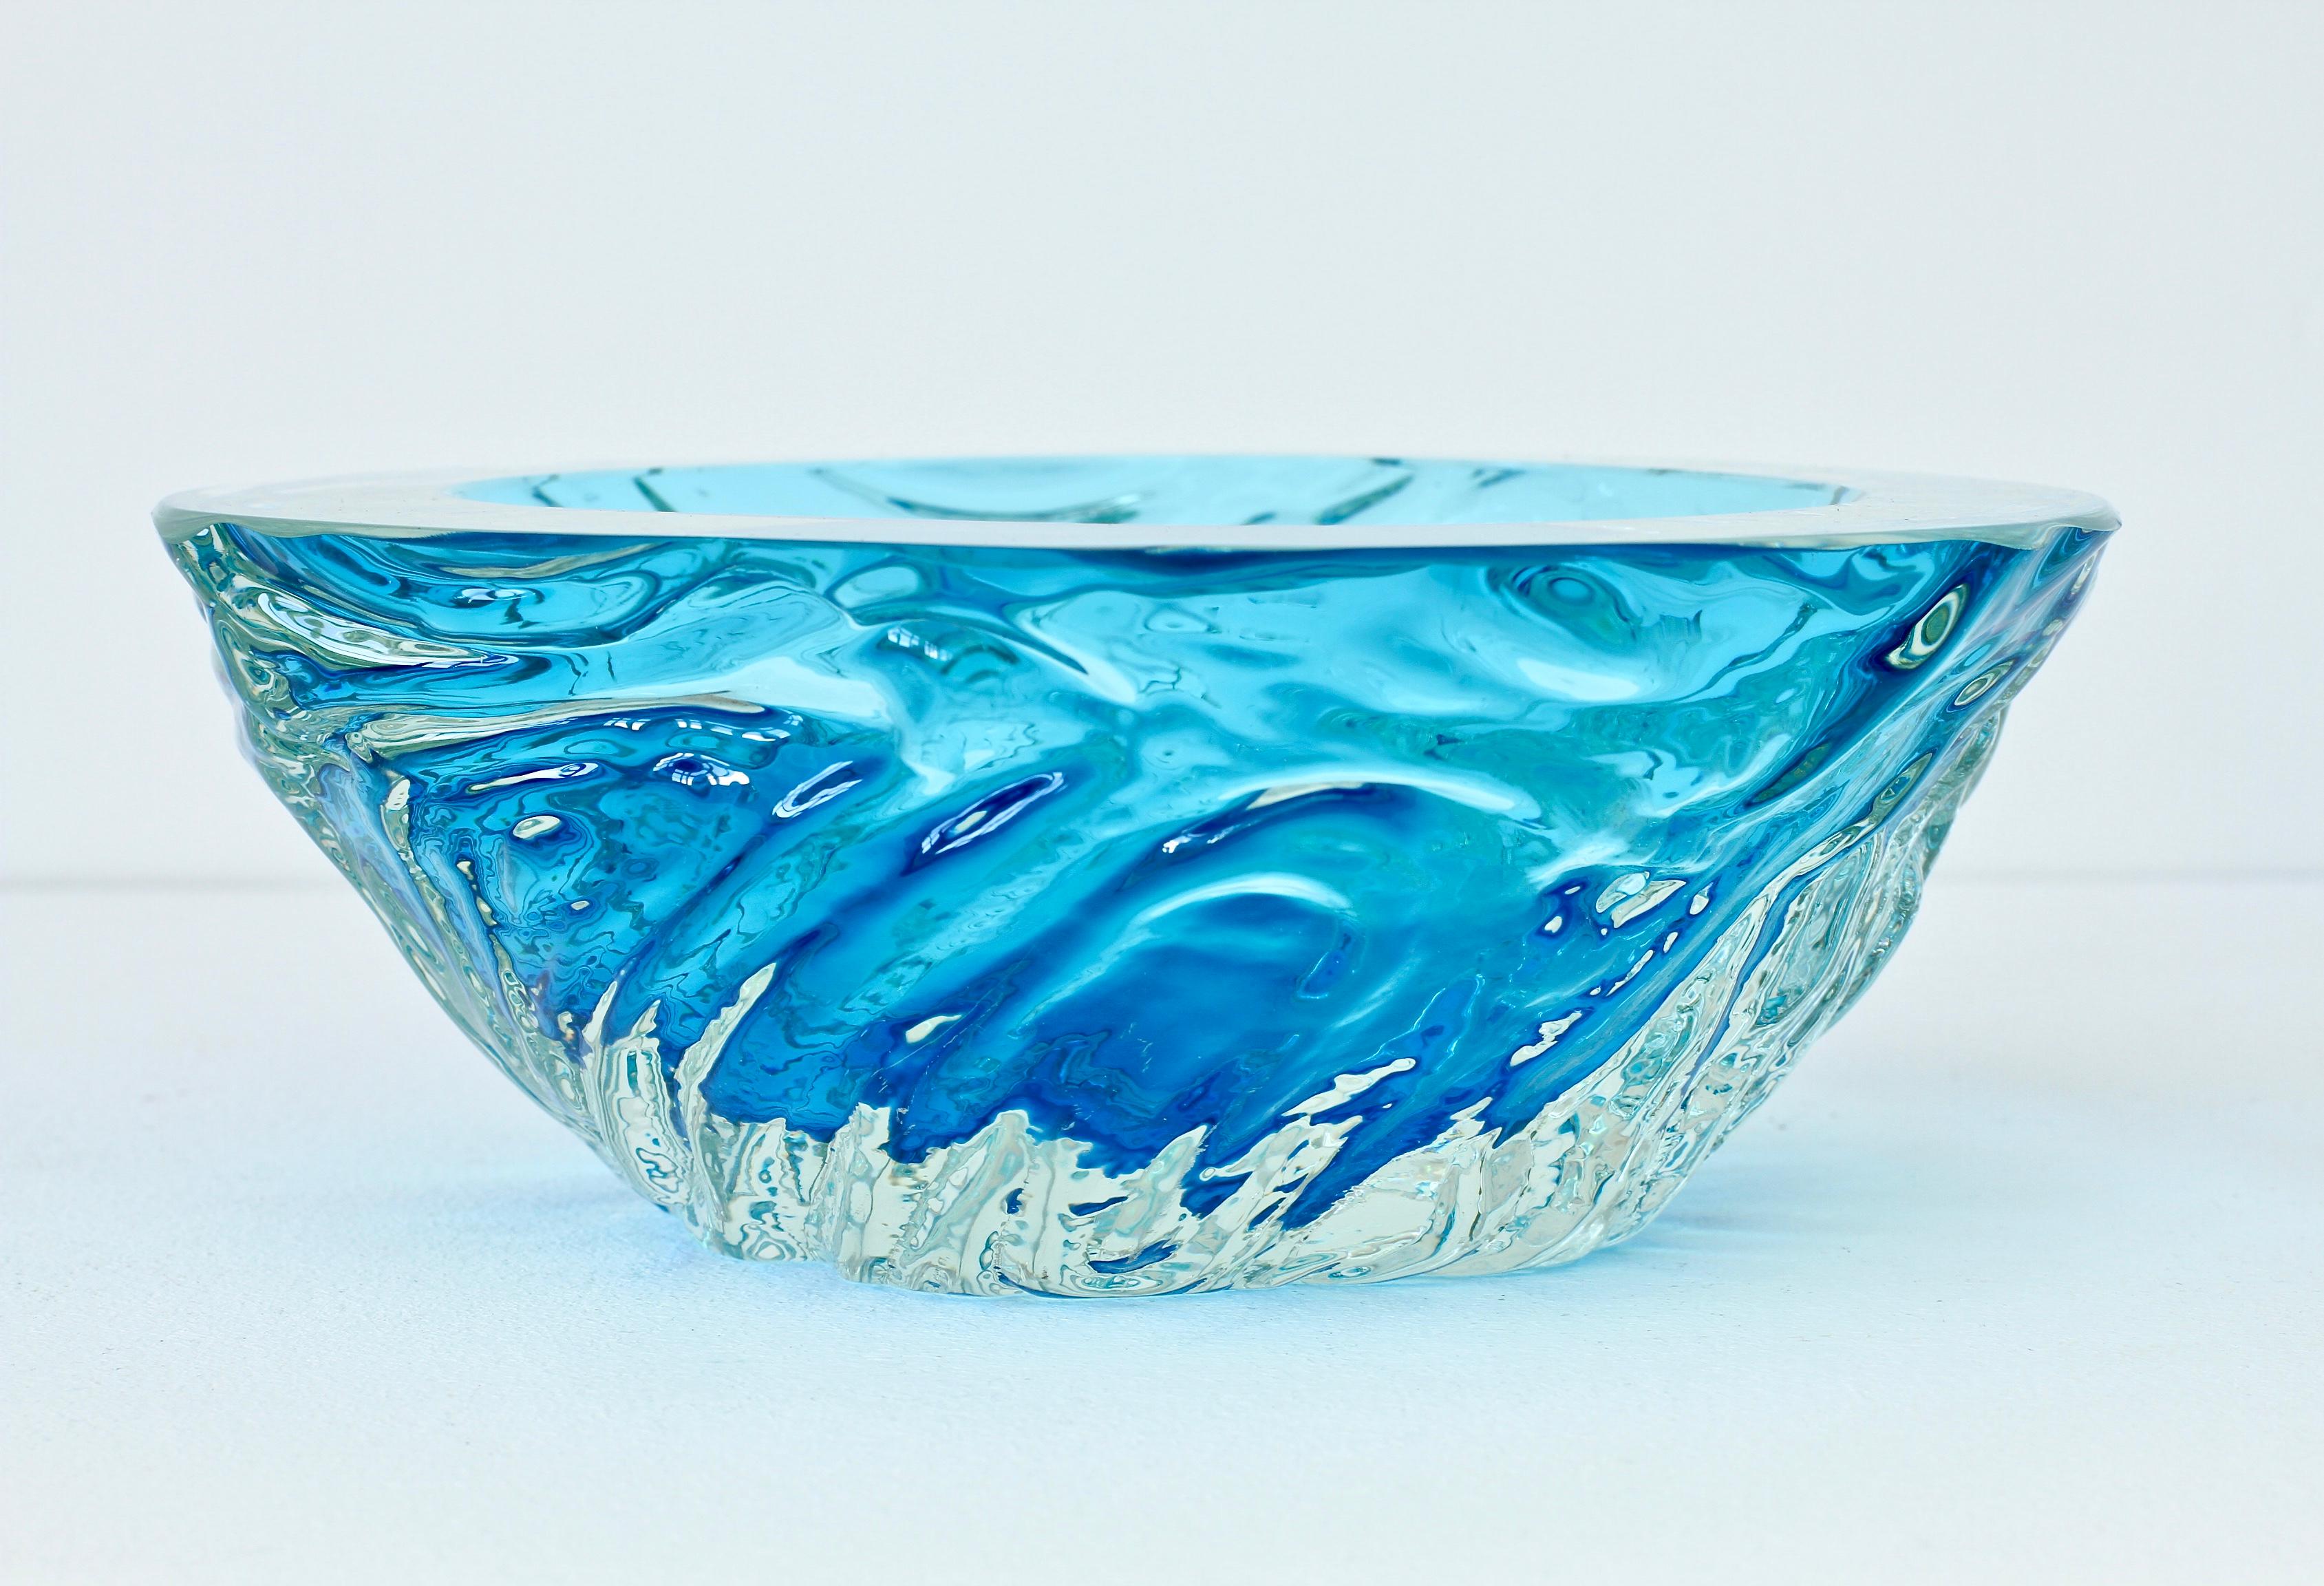 20th Century Midcentury Modern Large Italian Blue 'Sommerso' Murano Glass Bowl, Seguso attri. For Sale